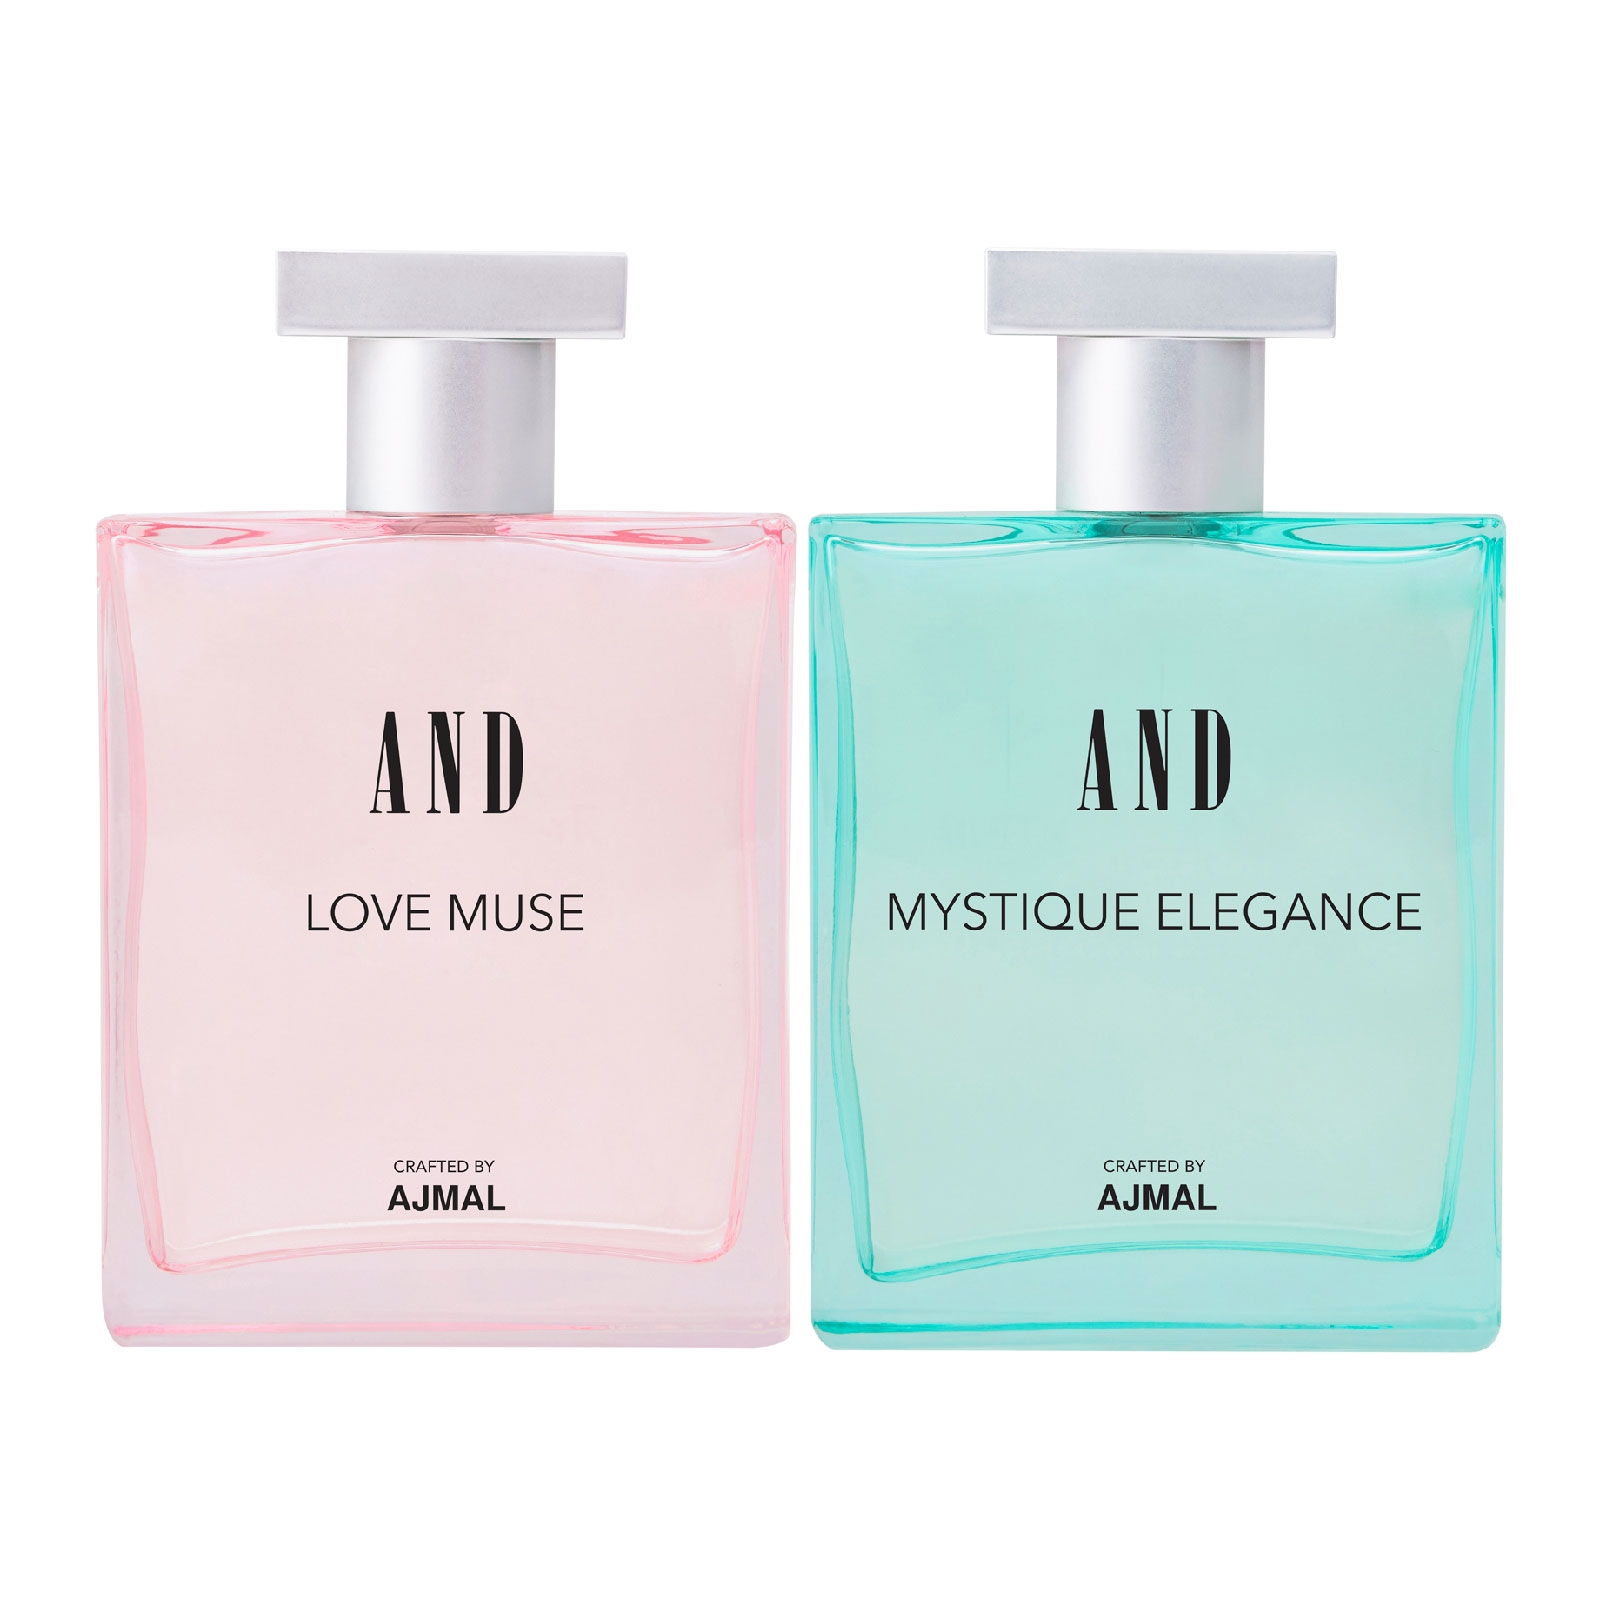 AND Love Muse & Mystique Elegance Pack of 2 Eau De Perfume 100ML each for Women Crafted by Ajmal